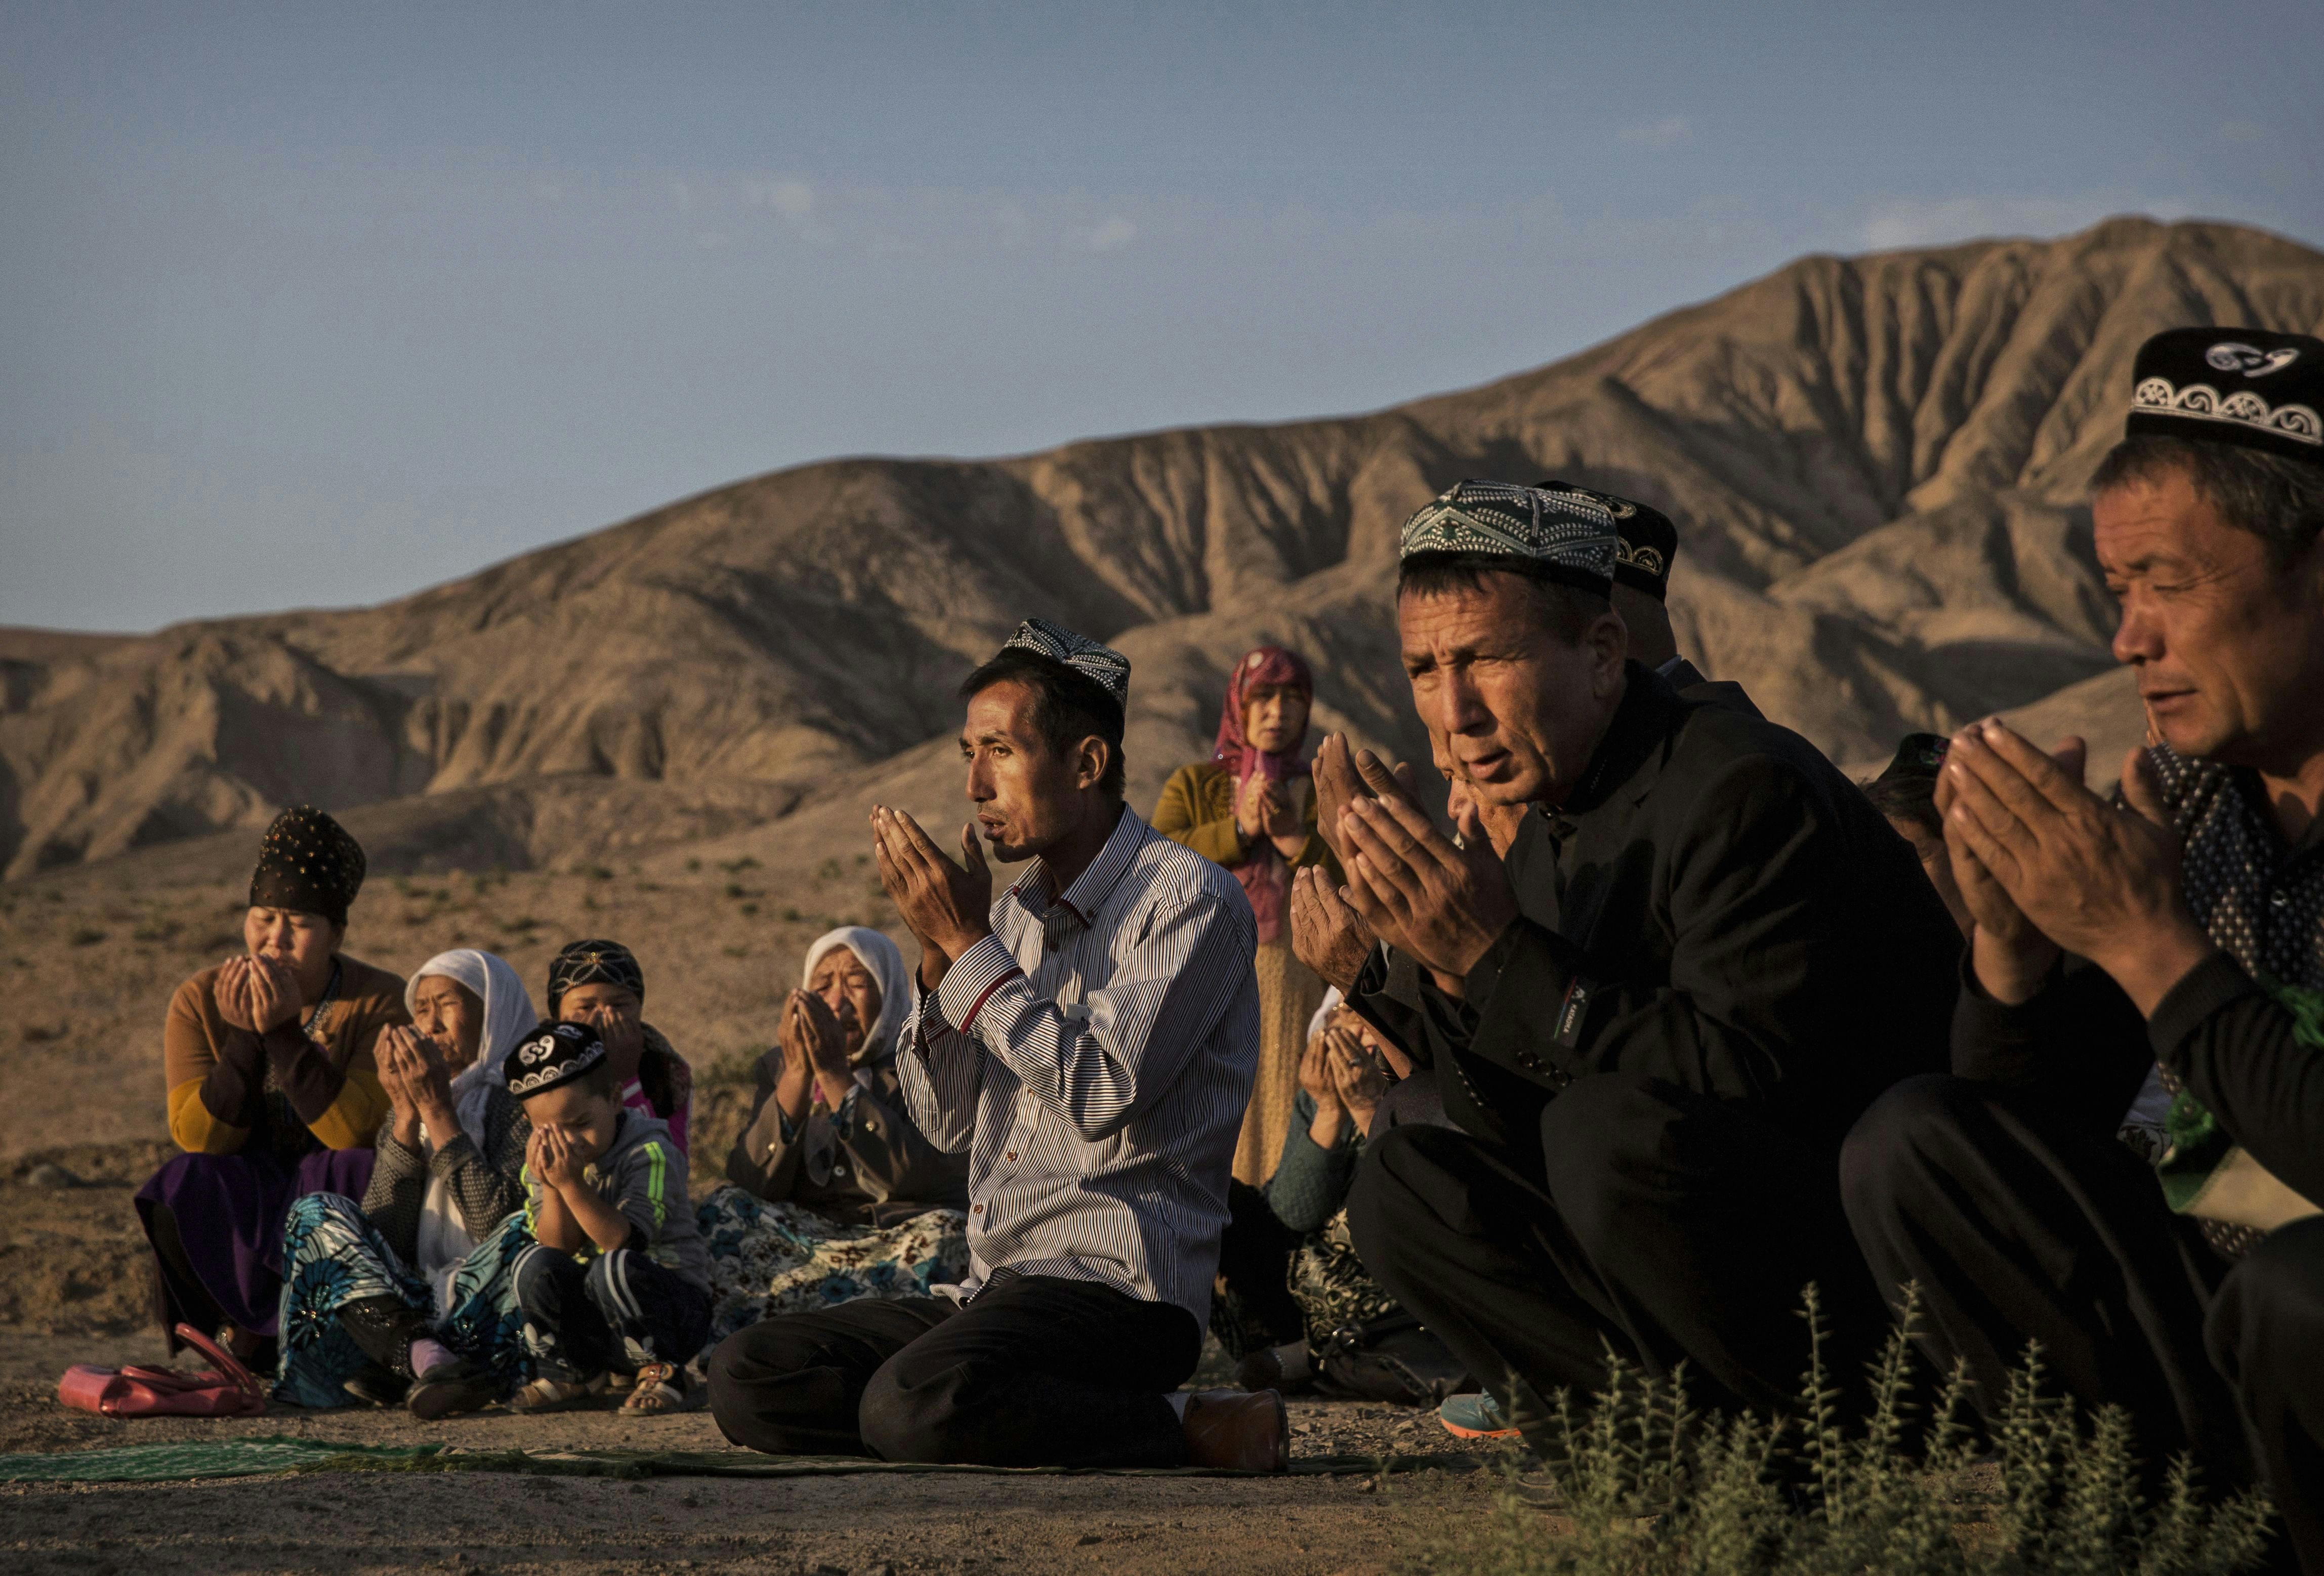 TURPAN, CHINA - SEPTEMBER 12:  (CHINA OUT) A Uyghur family pray at the grave of a loved one on the morning of the Corban Festival on September 12, 2016 at a local shrine and cemetery in Turpan County, in the far western Xinjiang province, China. The Corban festival, known to Muslims worldwide as Eid al-Adha or 'feast of the sacrifice', is celebrated by ethnic Uyghurs across Xinjiang, the far-western region of China bordering Central Asia that is home to roughly half of the country's 23 million Muslims. The festival, considered the most important of the year, involves religious rites and visits to the graves of relatives, as well as sharing meals with family. Although Islam is a 'recognized' religion in the constitution of officially atheist China, ethnic Uyghurs are subjected to restrictions on religious and cultural practices that are imposed by China's Communist Party. Ethnic tensions have fueled violence that Chinese authorities point to as justification for the restrictions.  (Photo by Kevin Frayer/Getty Images)